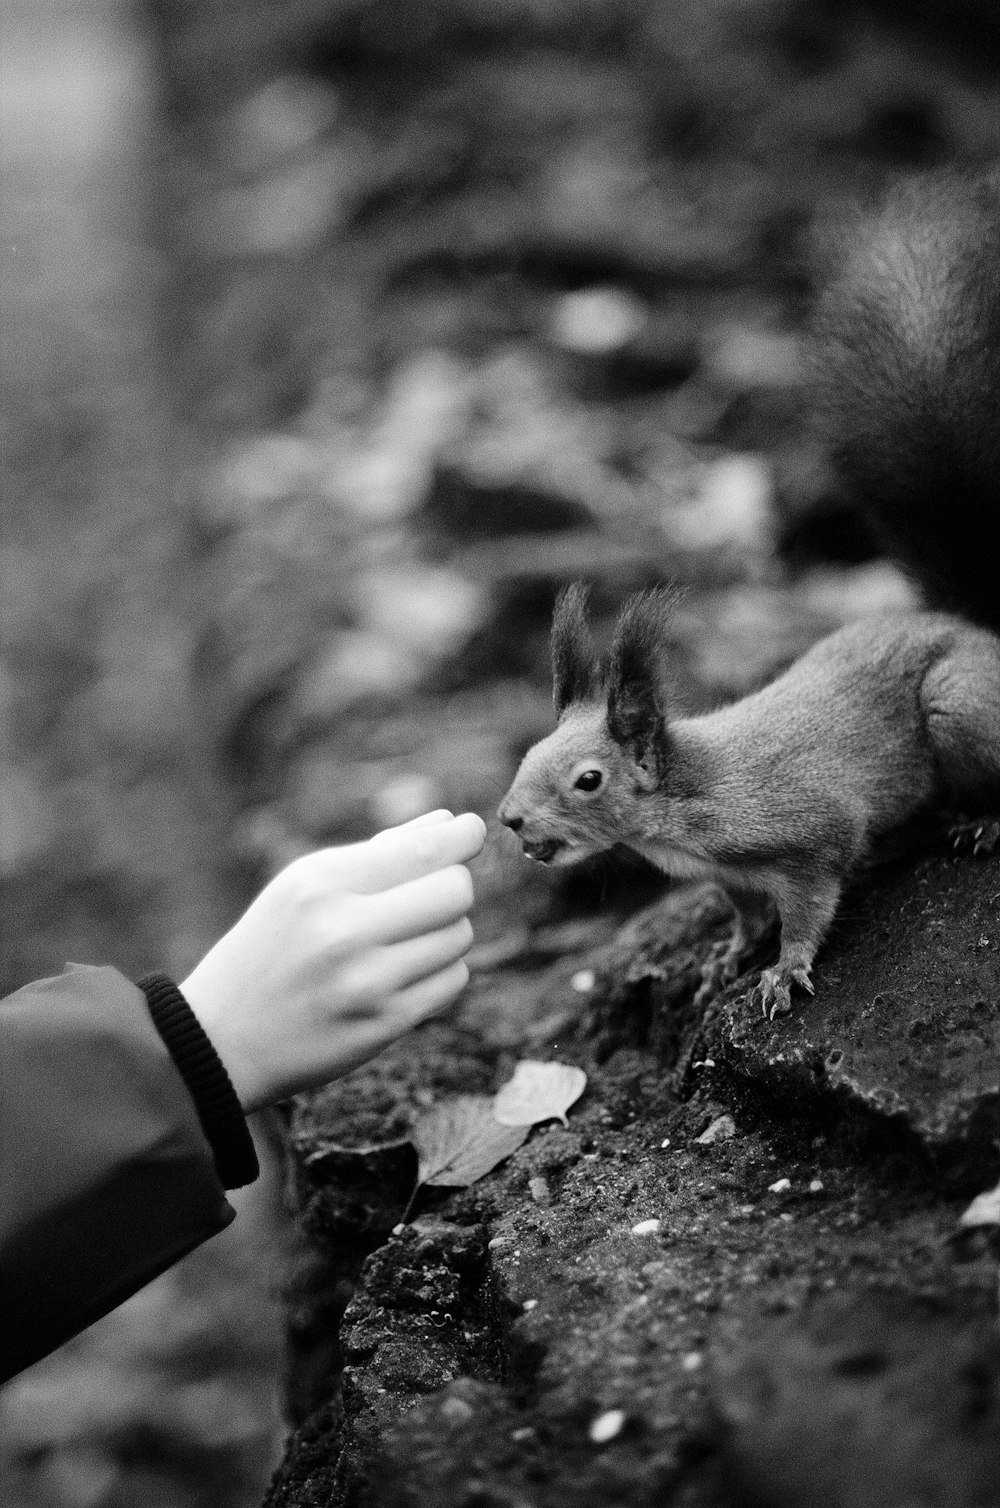 a small squirrel being fed by a person